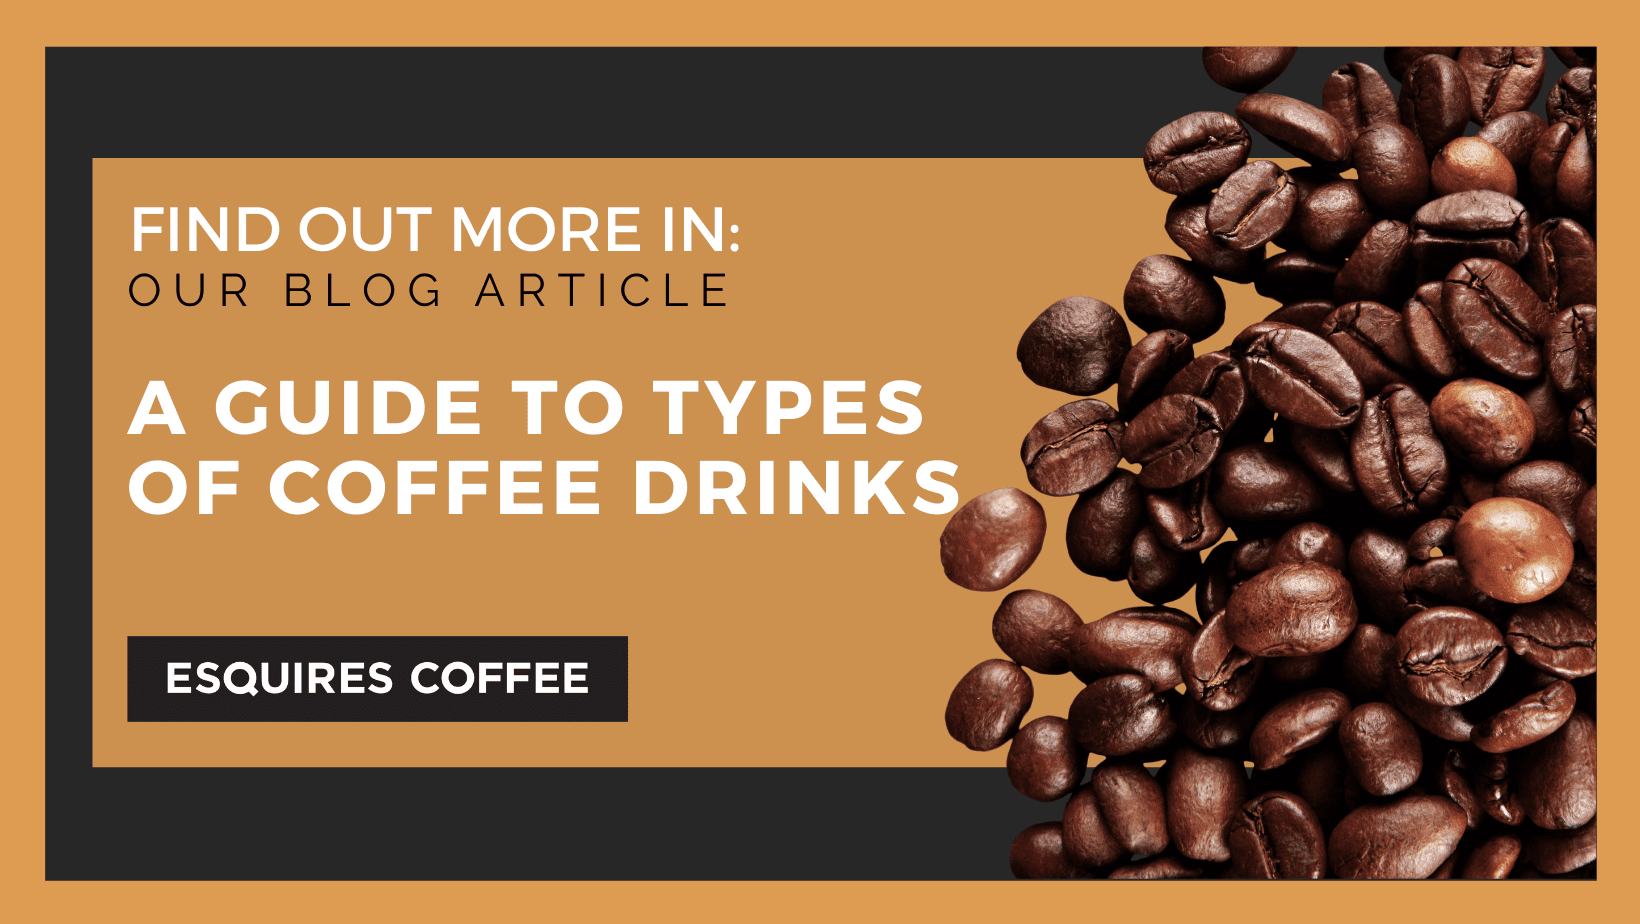 A guide to types of coffee drinks